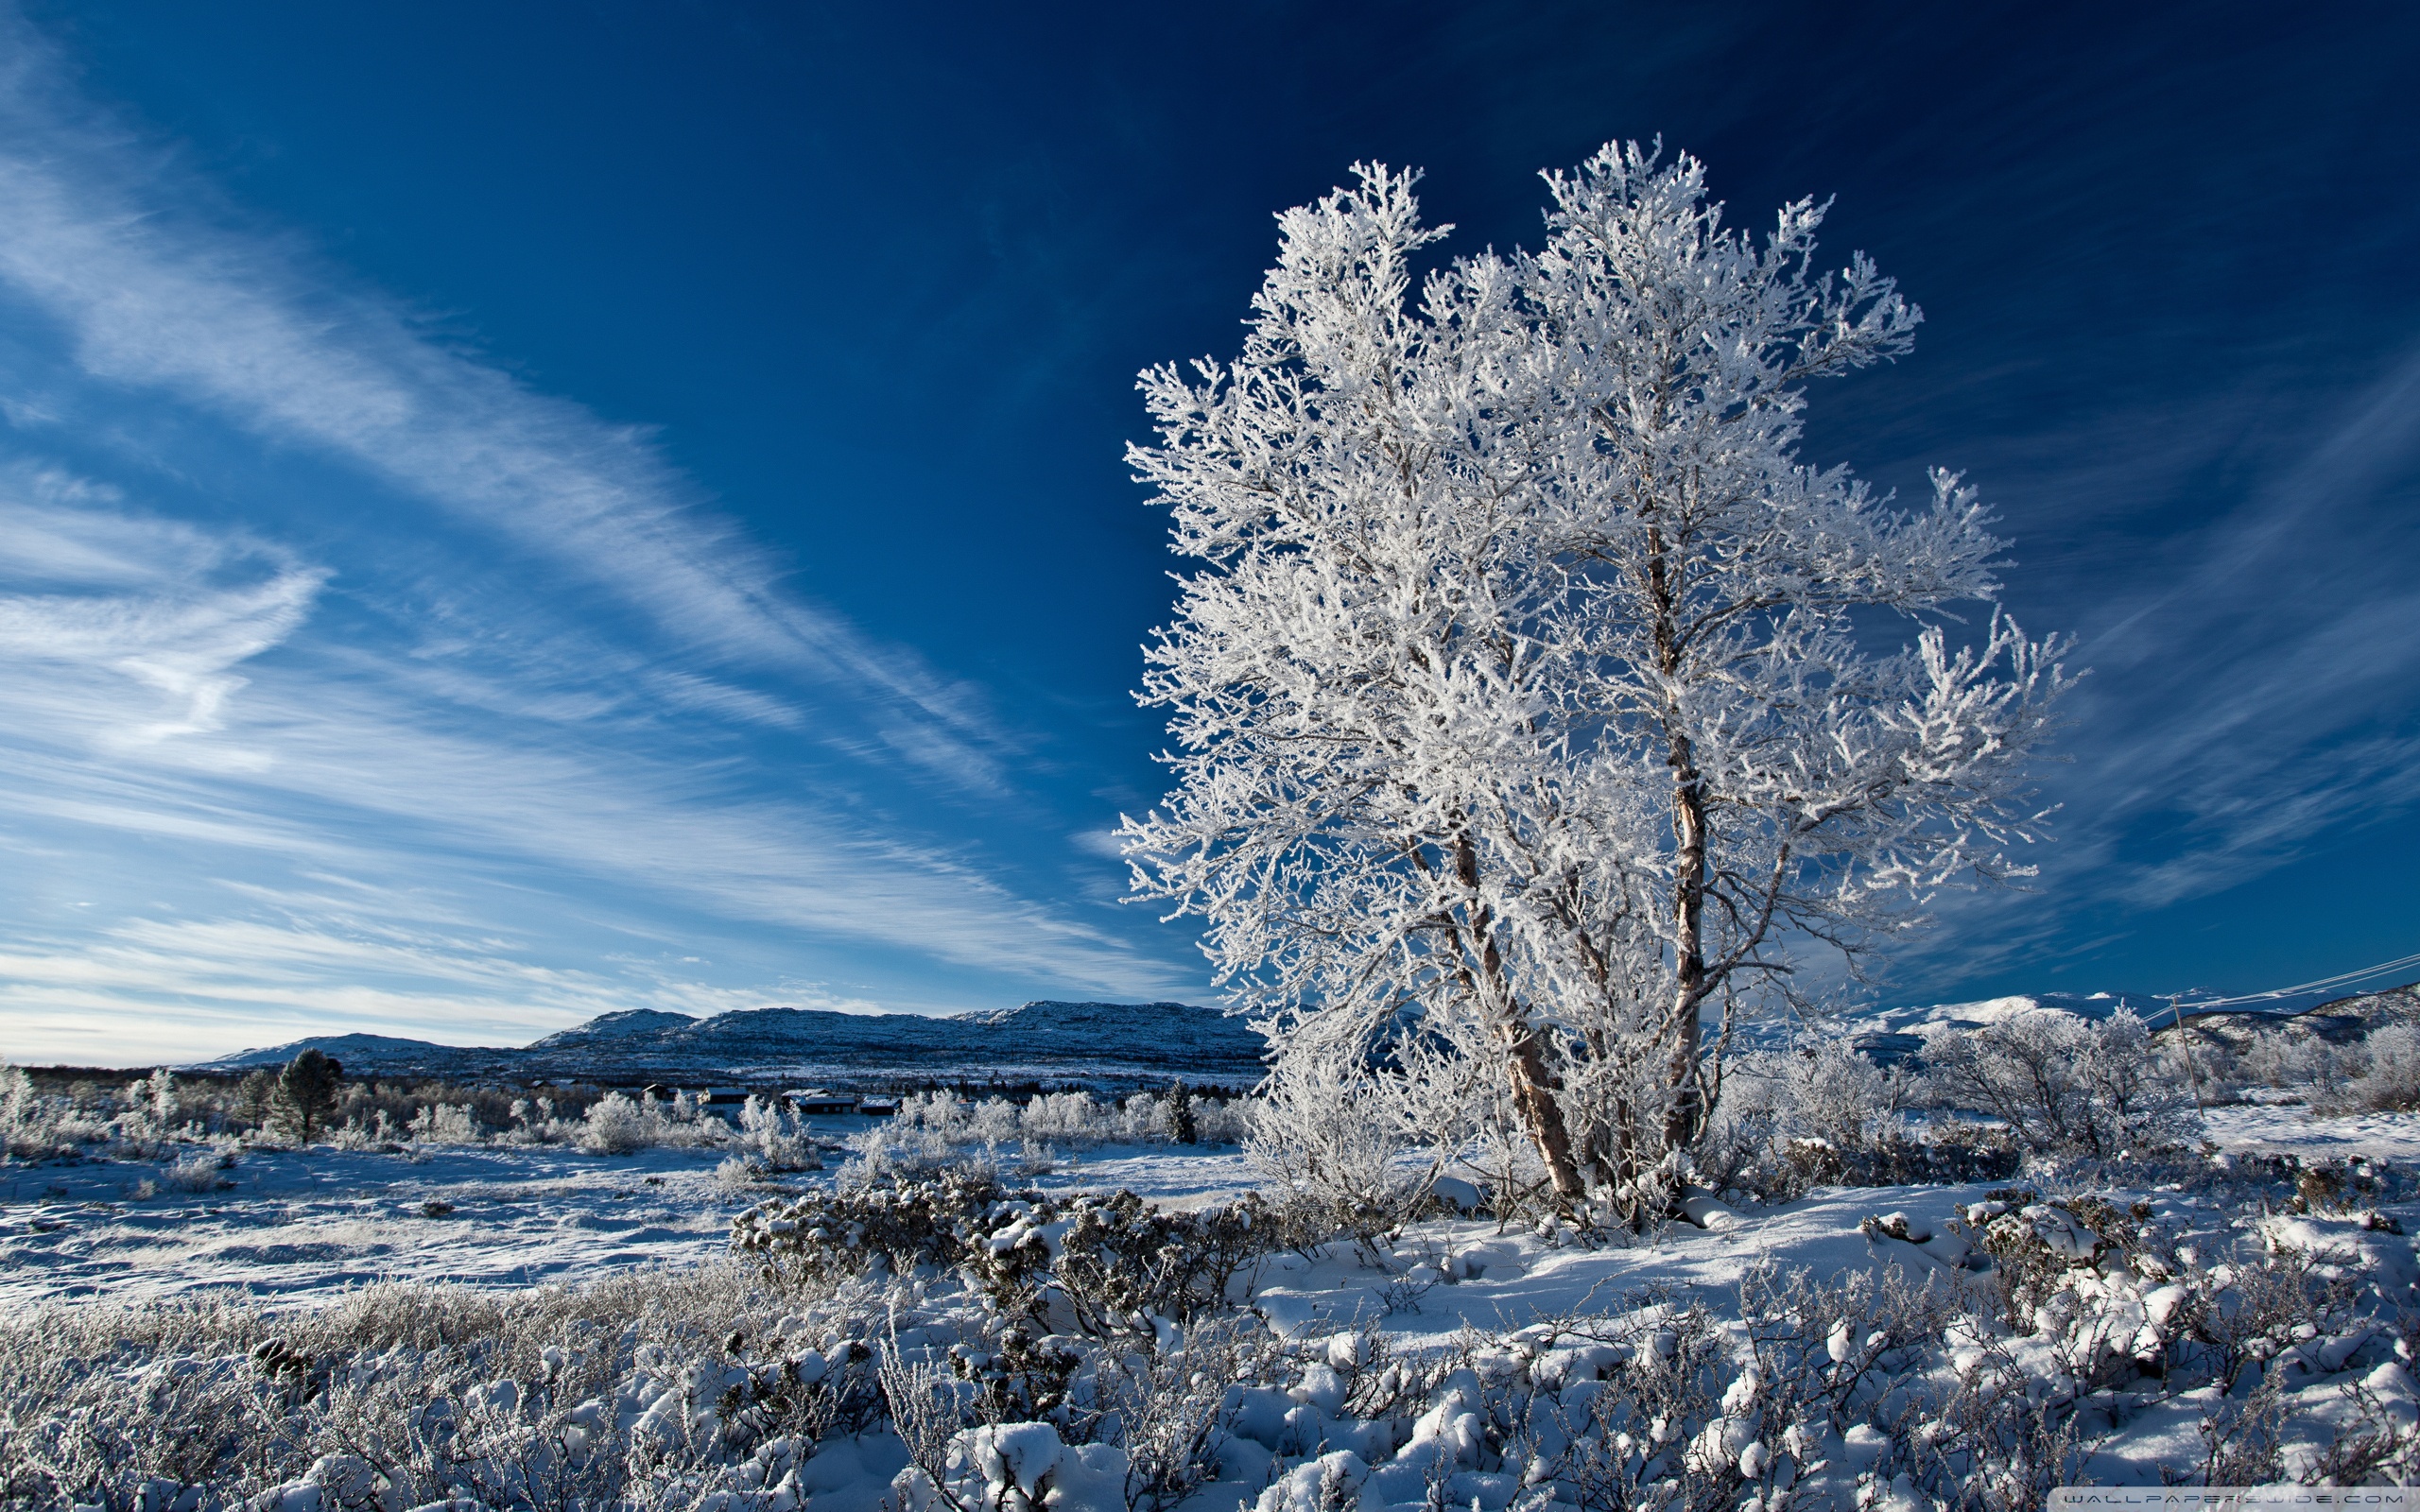 Winter Blue Sky Wallpaper And Image Pictures Photos